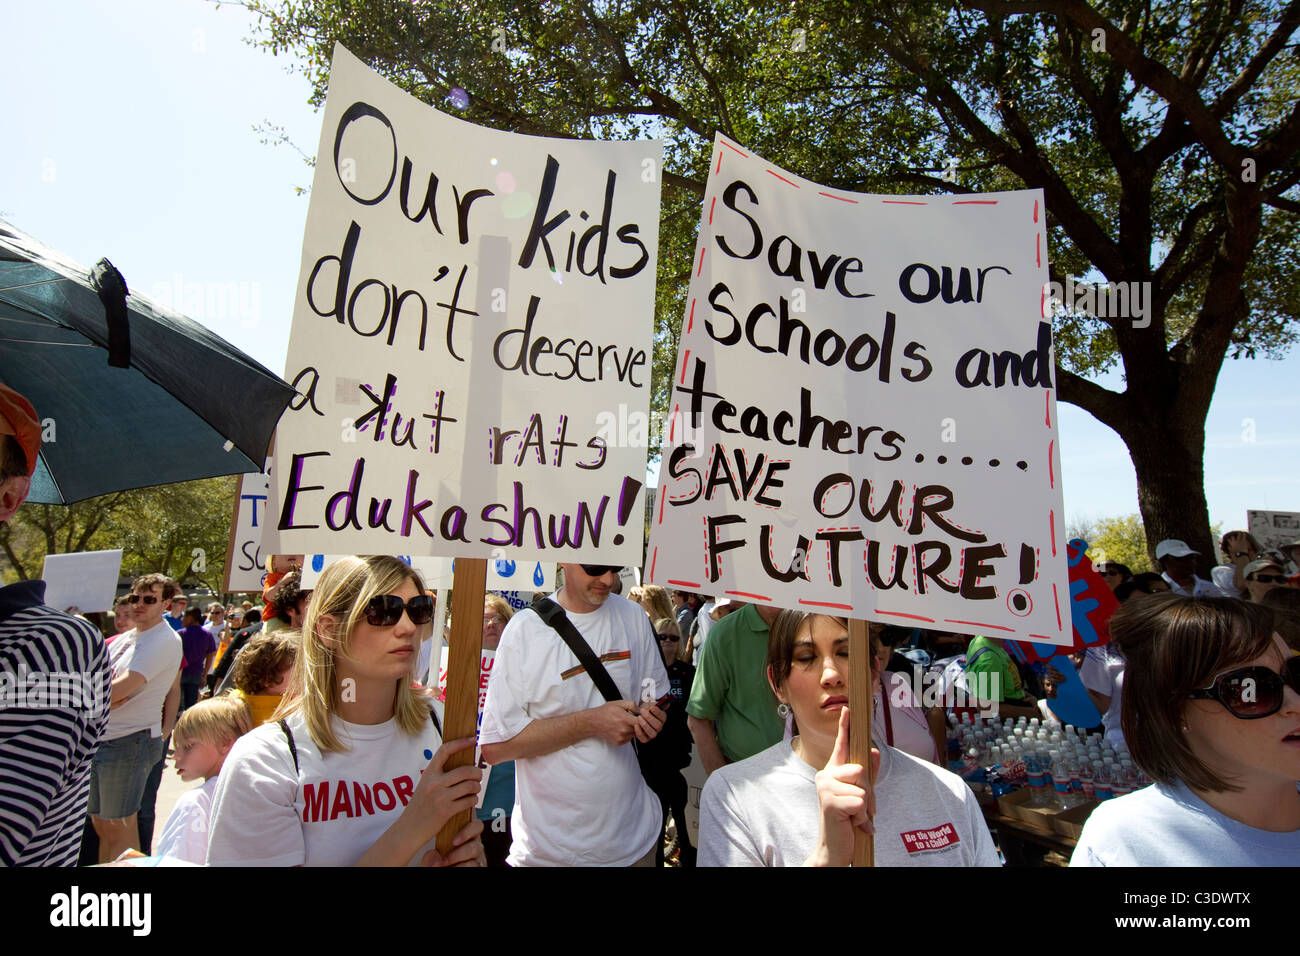 A protest rally at the Texas Capitol dubbed Save Texas Schools as teachers and parents decry 2011 legislative budget cuts. Stock Photo